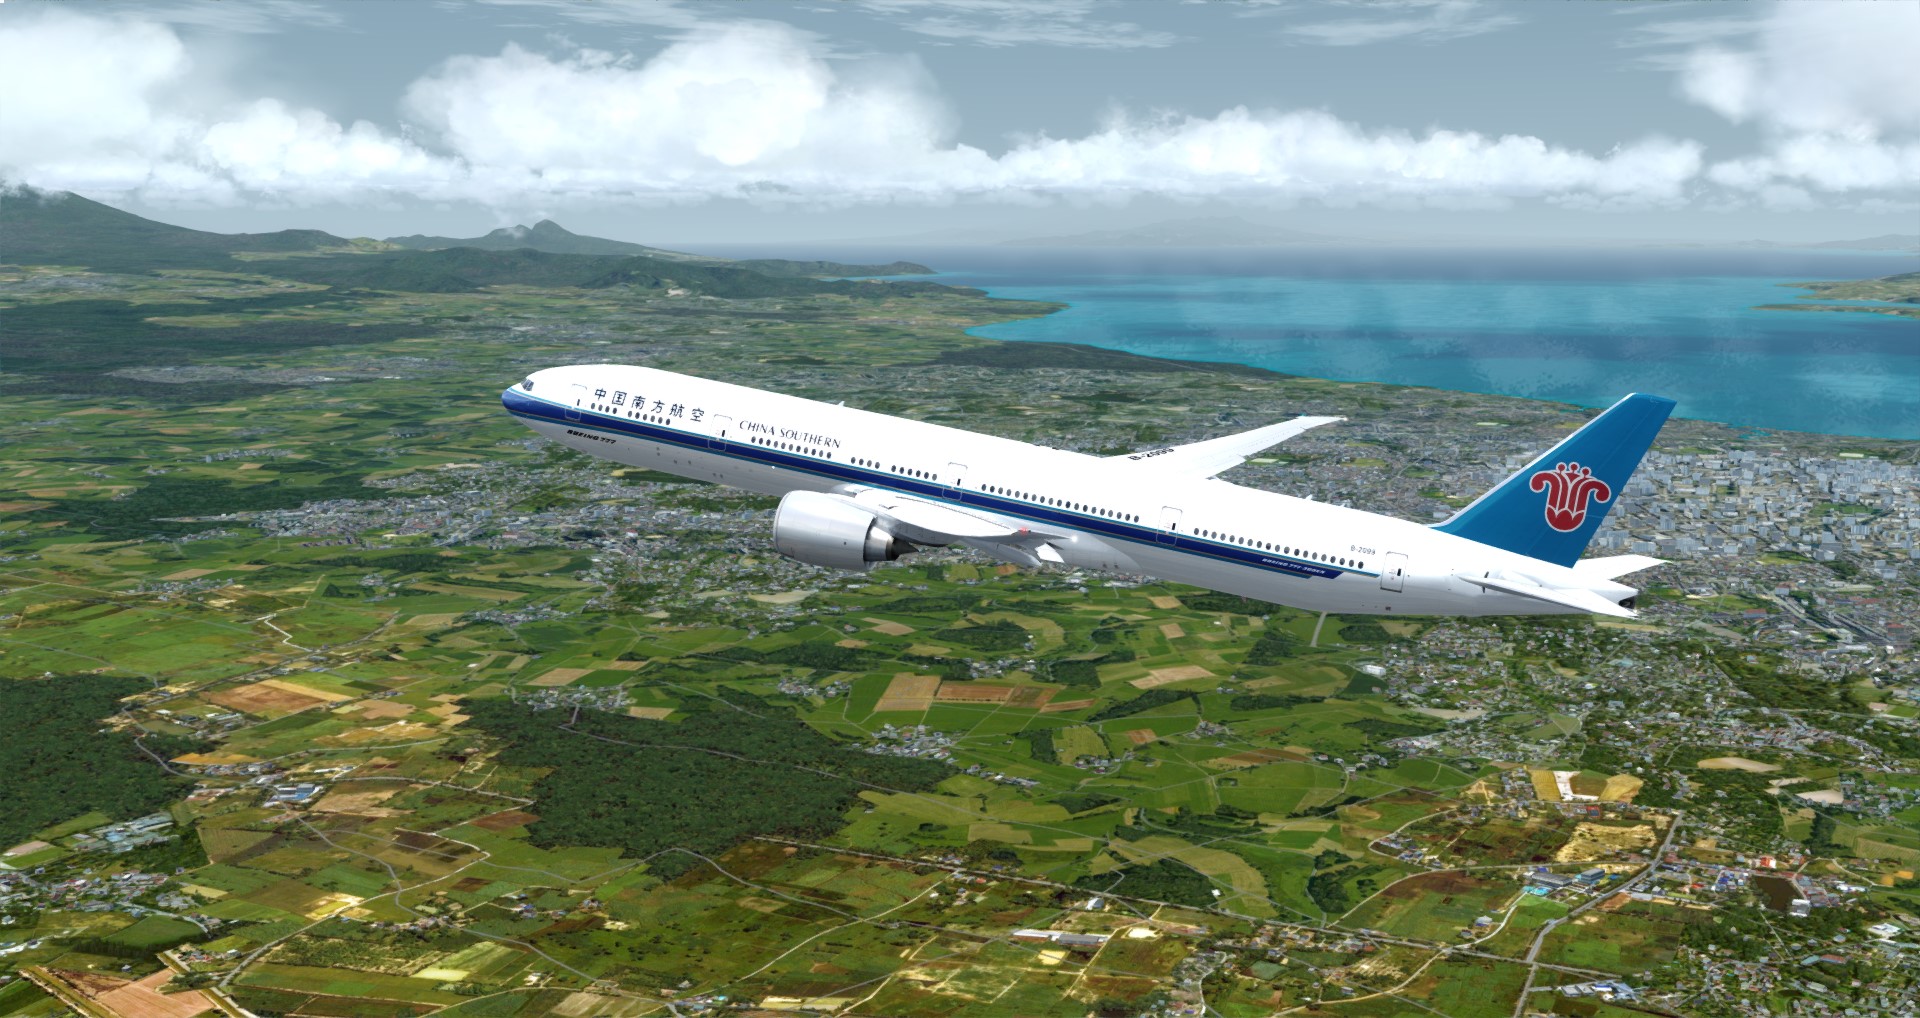 P3D V4 77W China Southern Airlines WADD-ZGGG 营救同胞-4339 